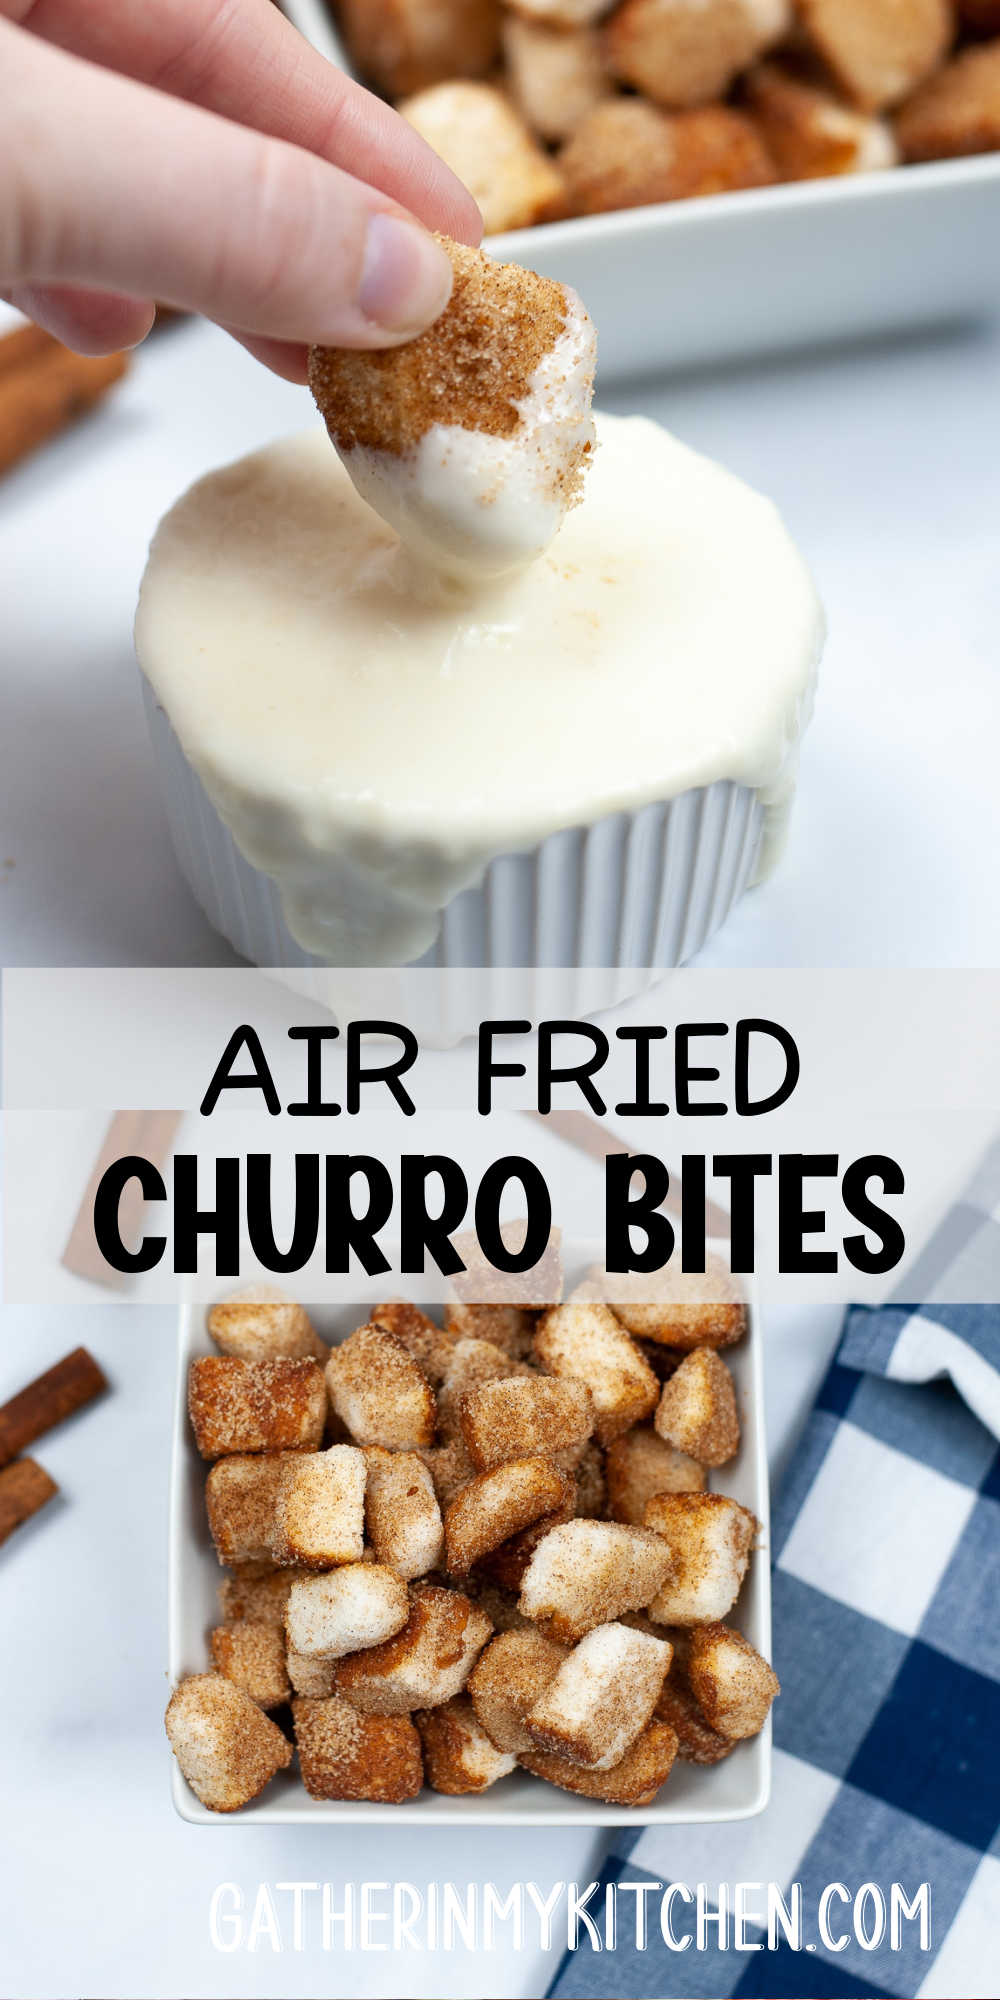 Pin image: top has someone dipping an churro bite into cream cheese dip, middle says "Air Fried Churro Bites" and bottom has a top down pic of churro bites in a bowl.